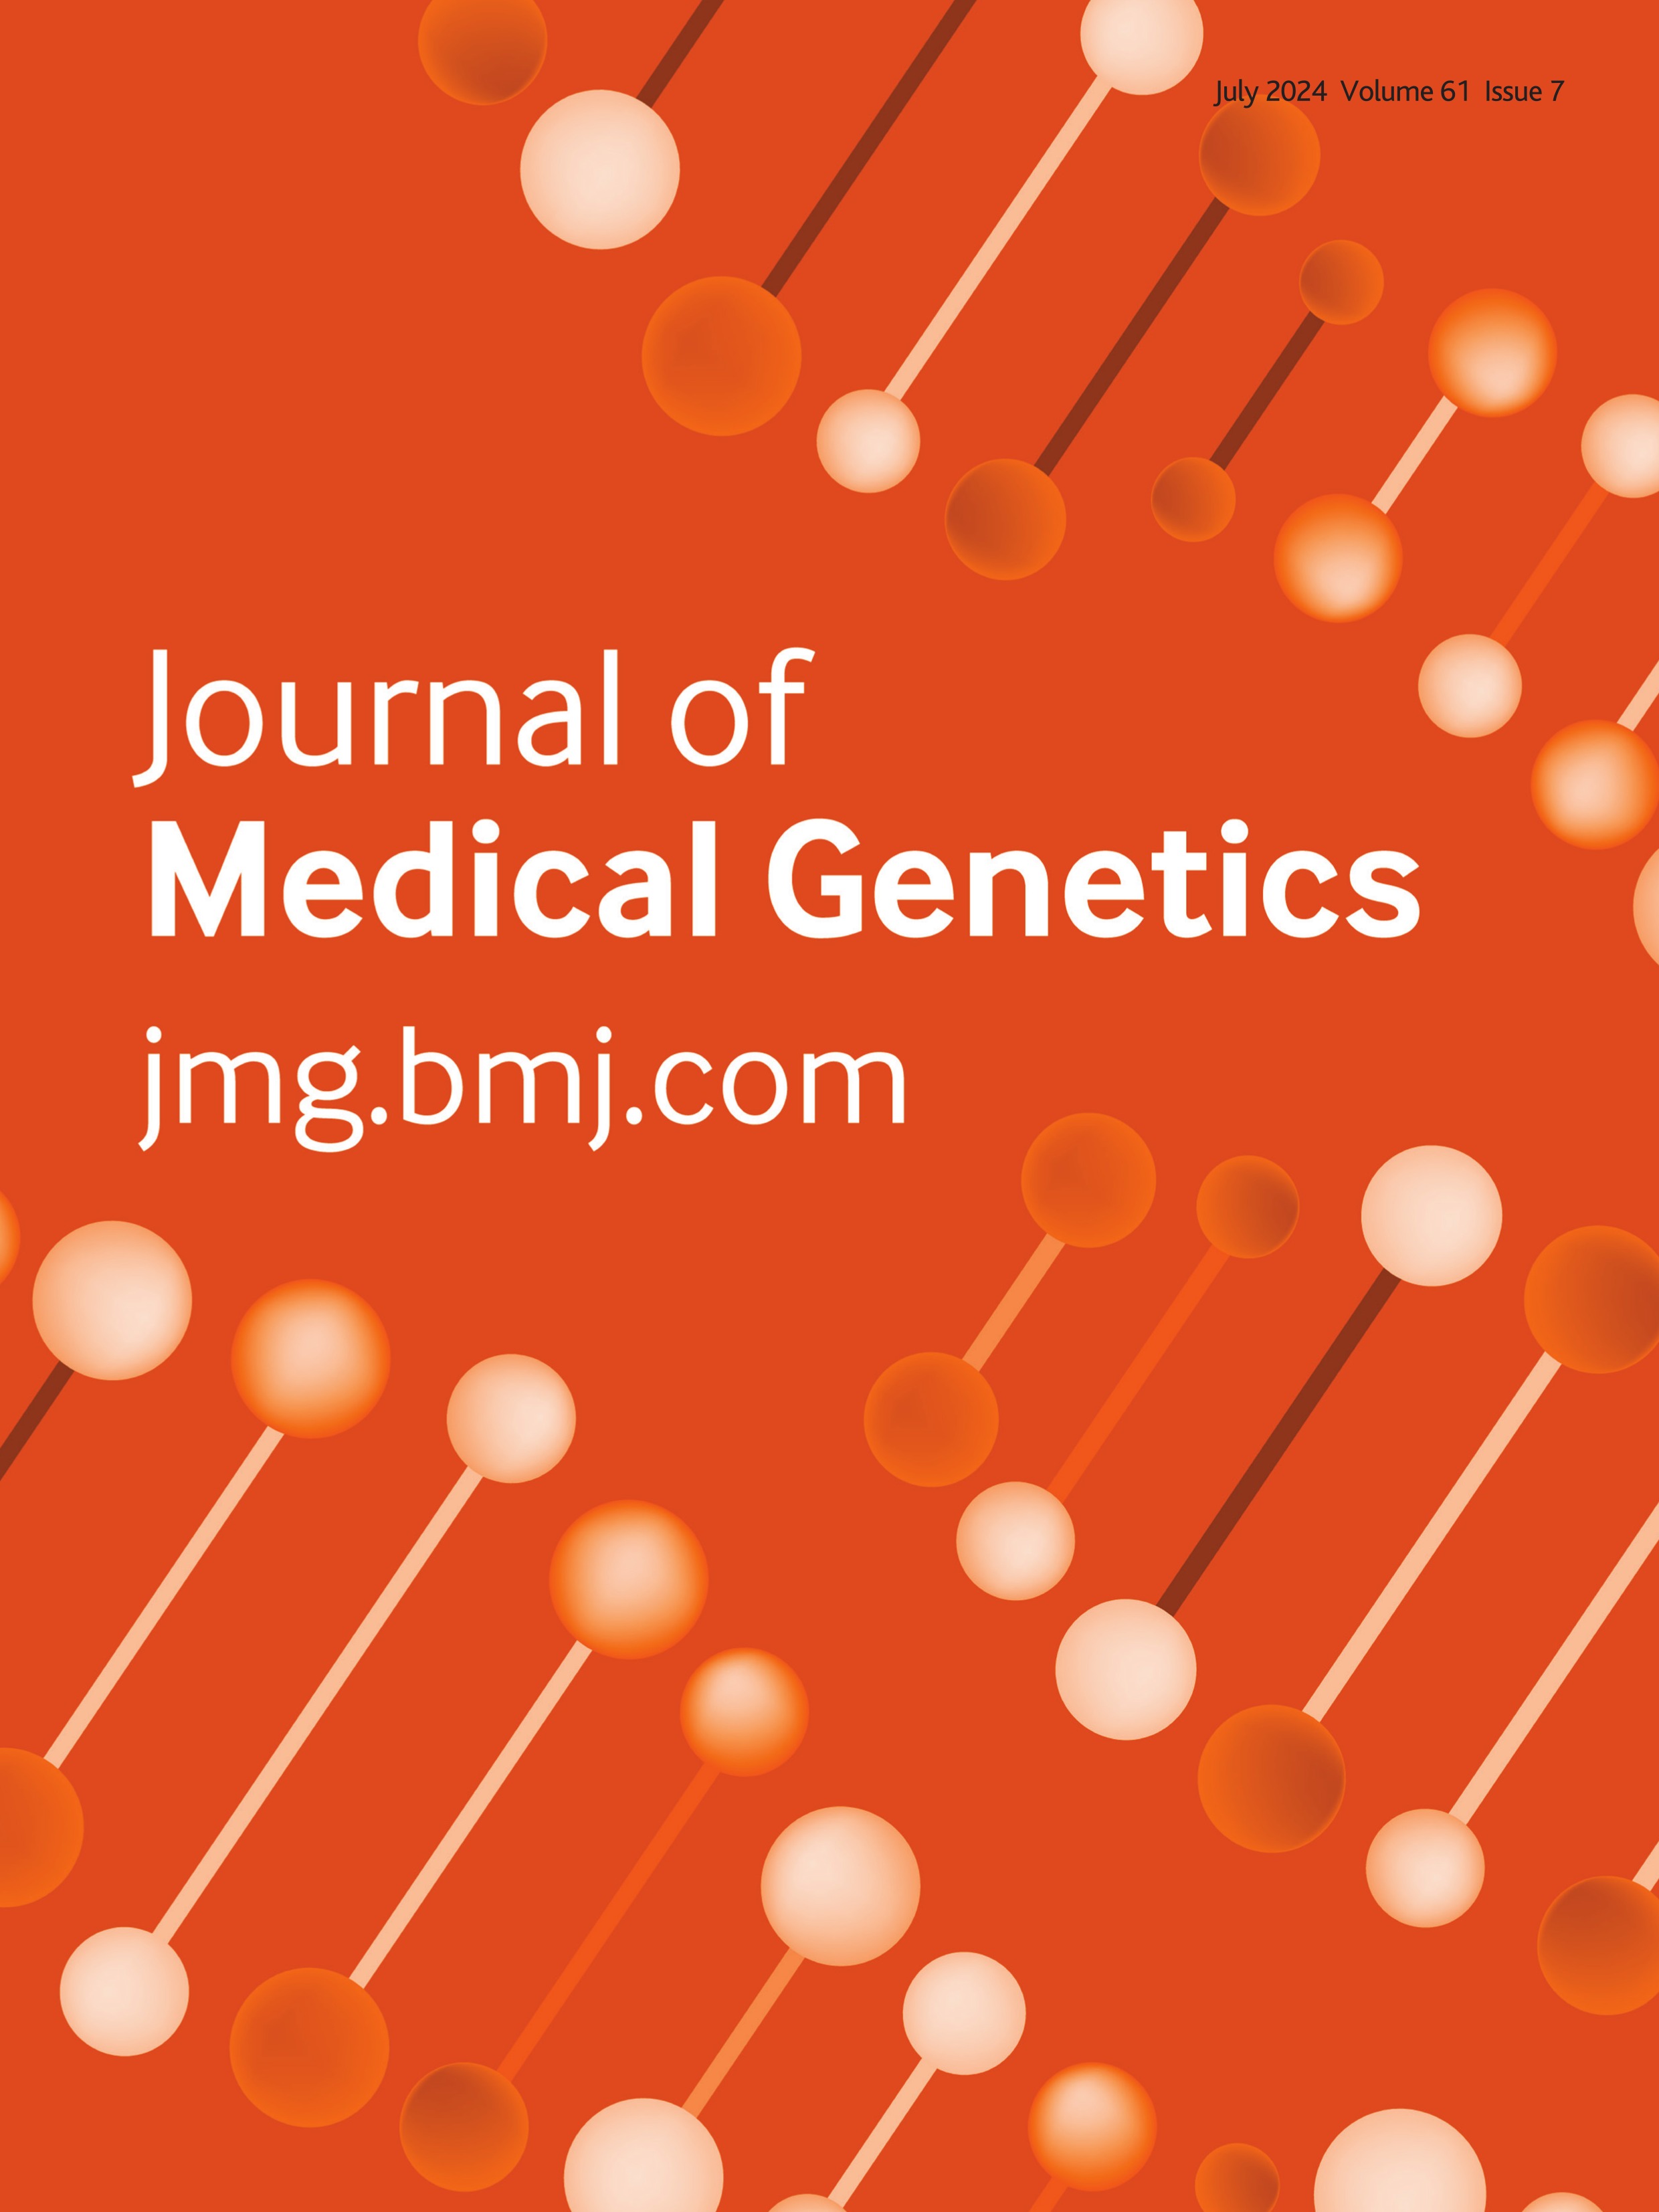 Exome sequencing of 1190 non-syndromic clubfoot cases reveals HOXD12 as a novel disease gene